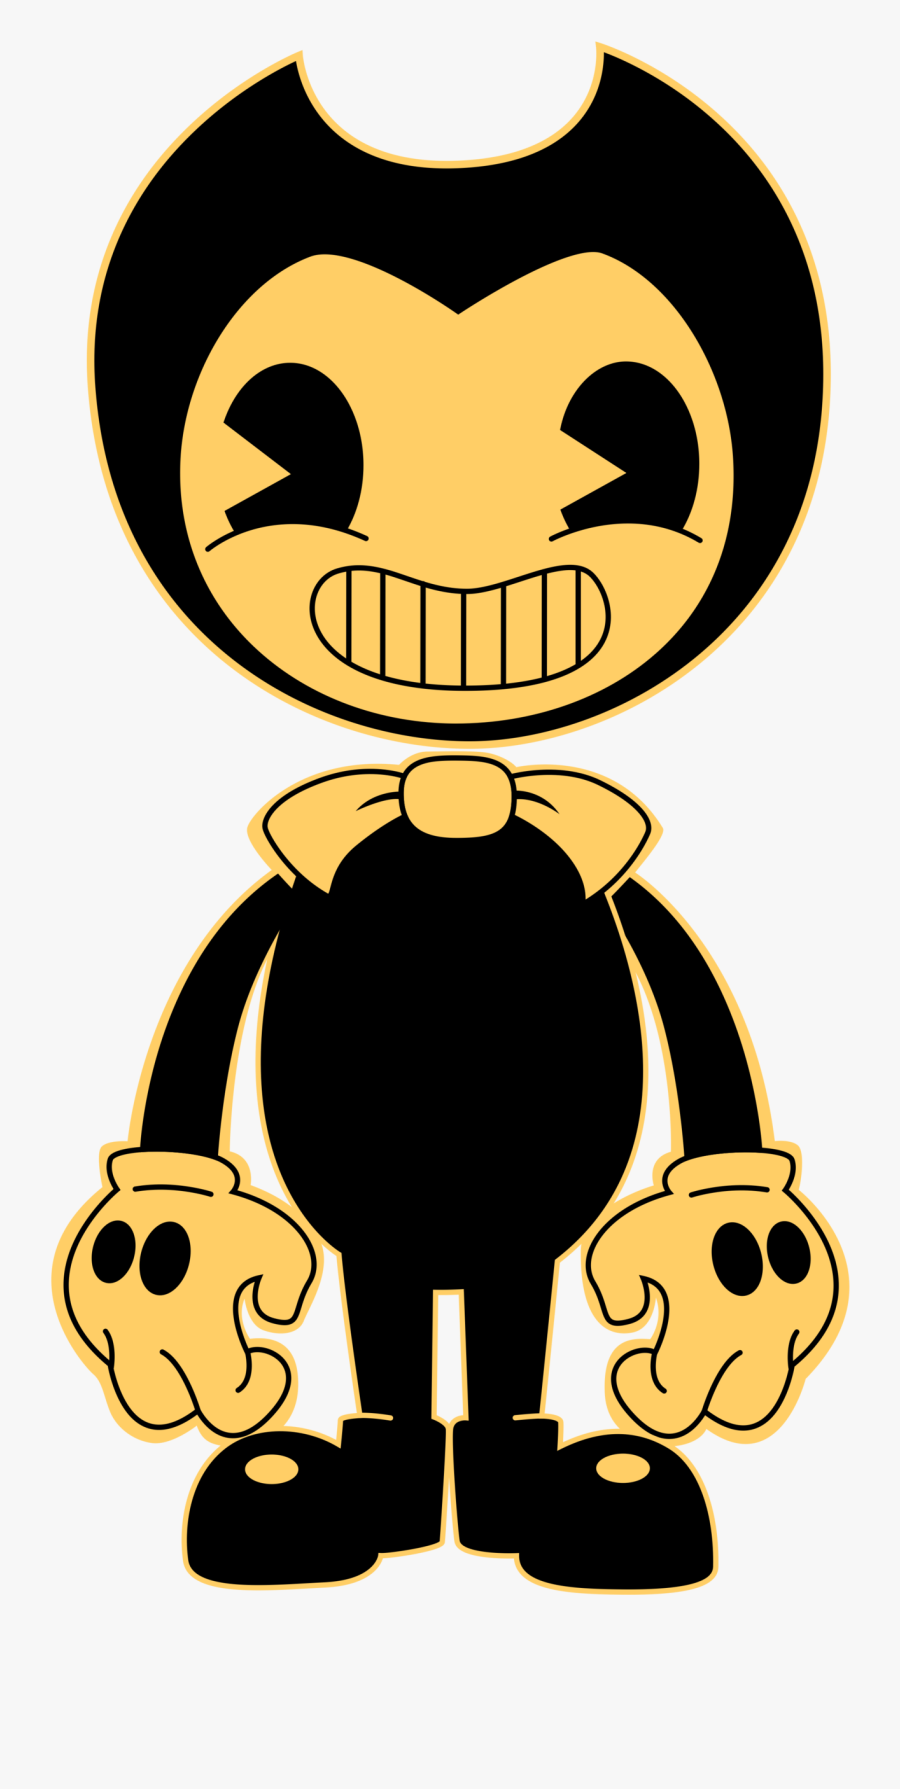 Beast Clipart Villian - Bendy And The Ink Machine, Transparent Clipart